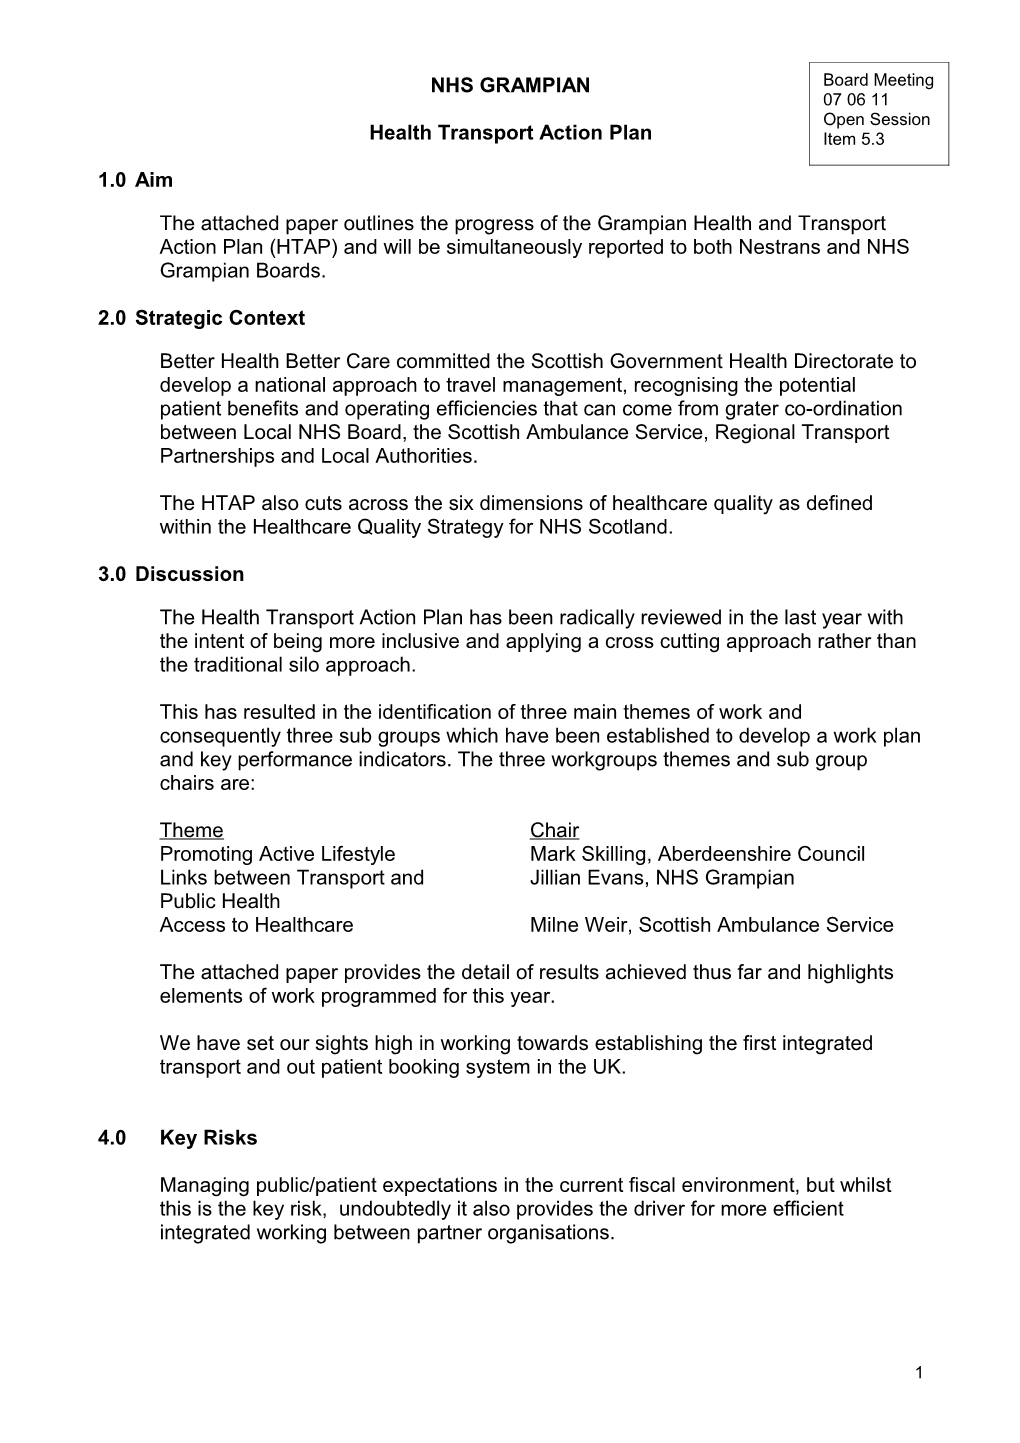 Item 5.3 for 7 June 2011 Health and Transport Action Plan Cover Page